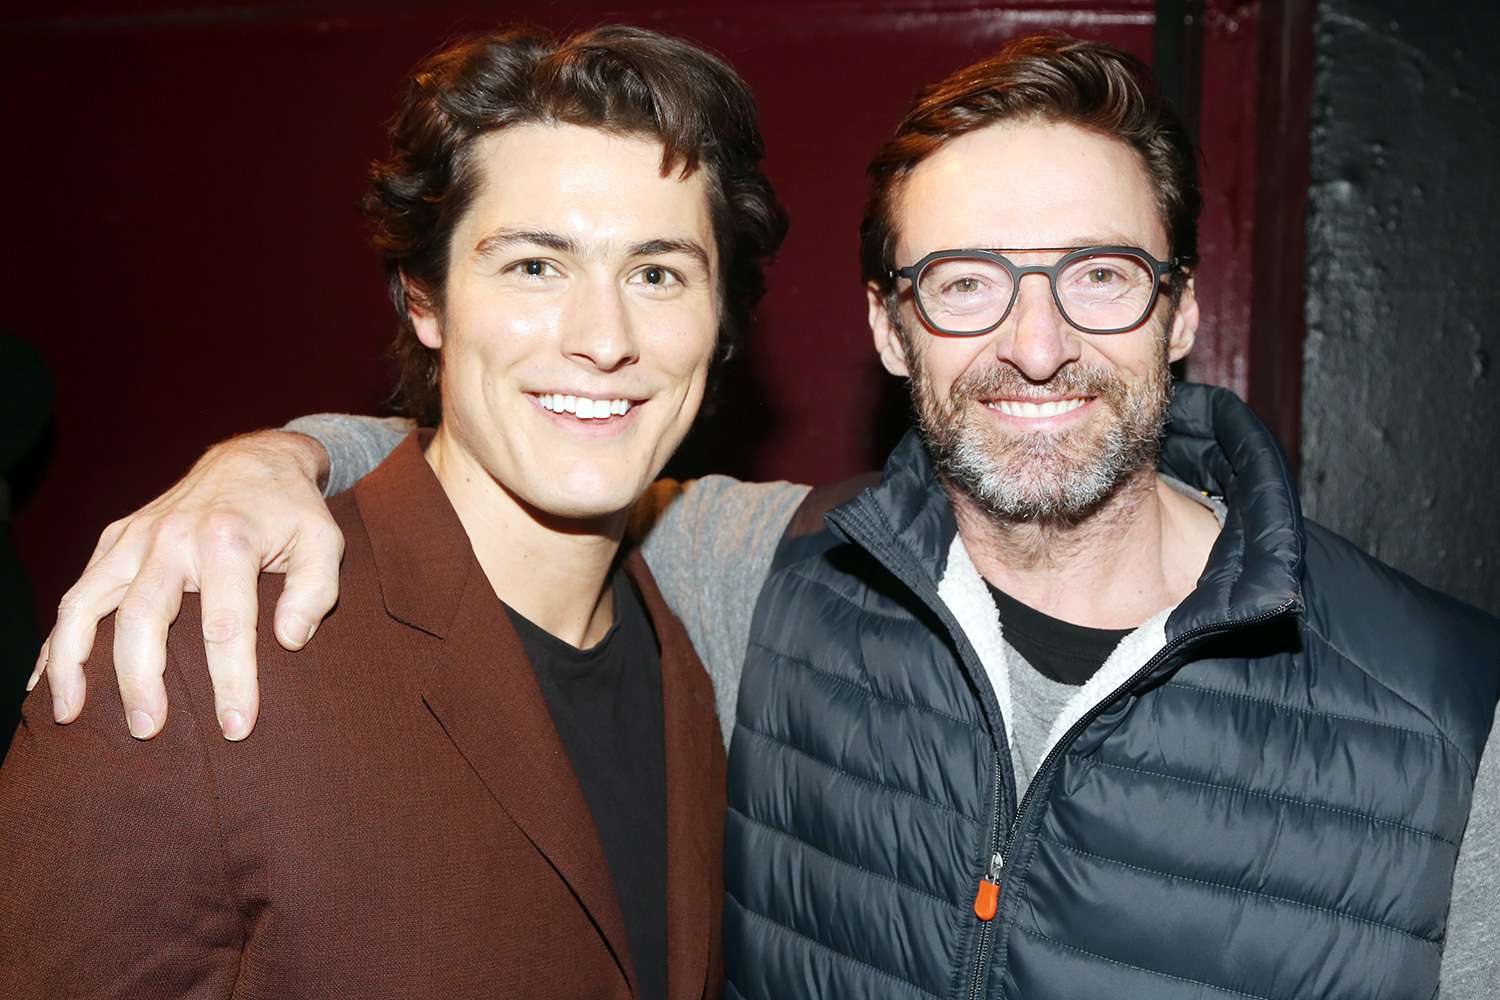 Wolfgang Novogratz and Hugh Jackman pose backstage at the limited engagement play "The Atheist" at Urban Stages Theatre on March 1, 2020 in New York City.